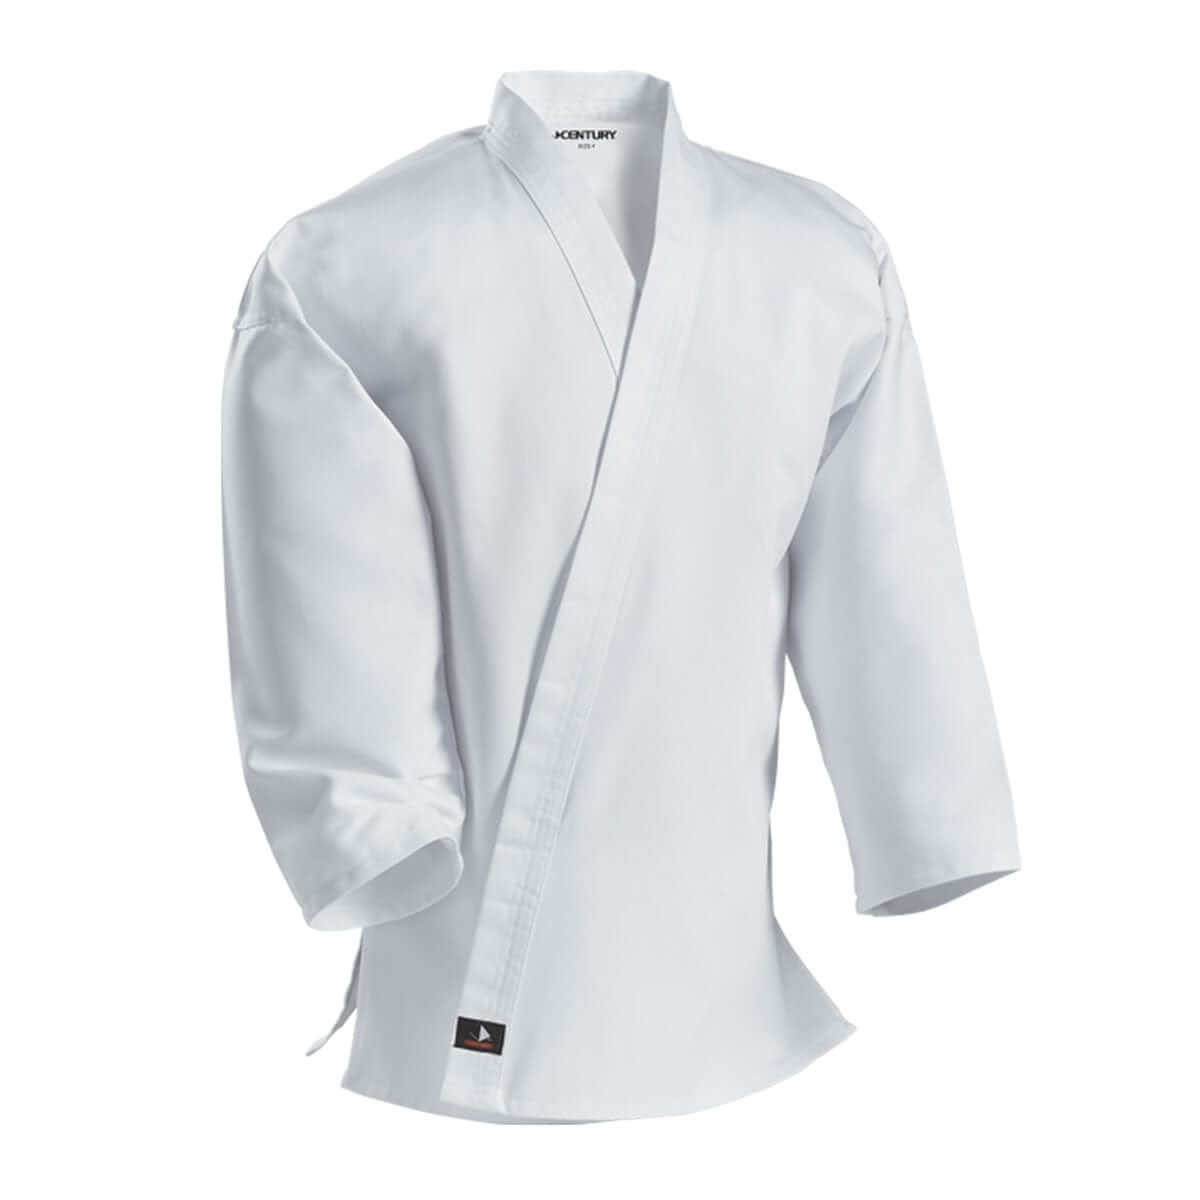 Eclipse Martial Art Supplies sporting goods white / 0 8 OZ. MIDDLEWEIGHT TRADITIONAL JACKET